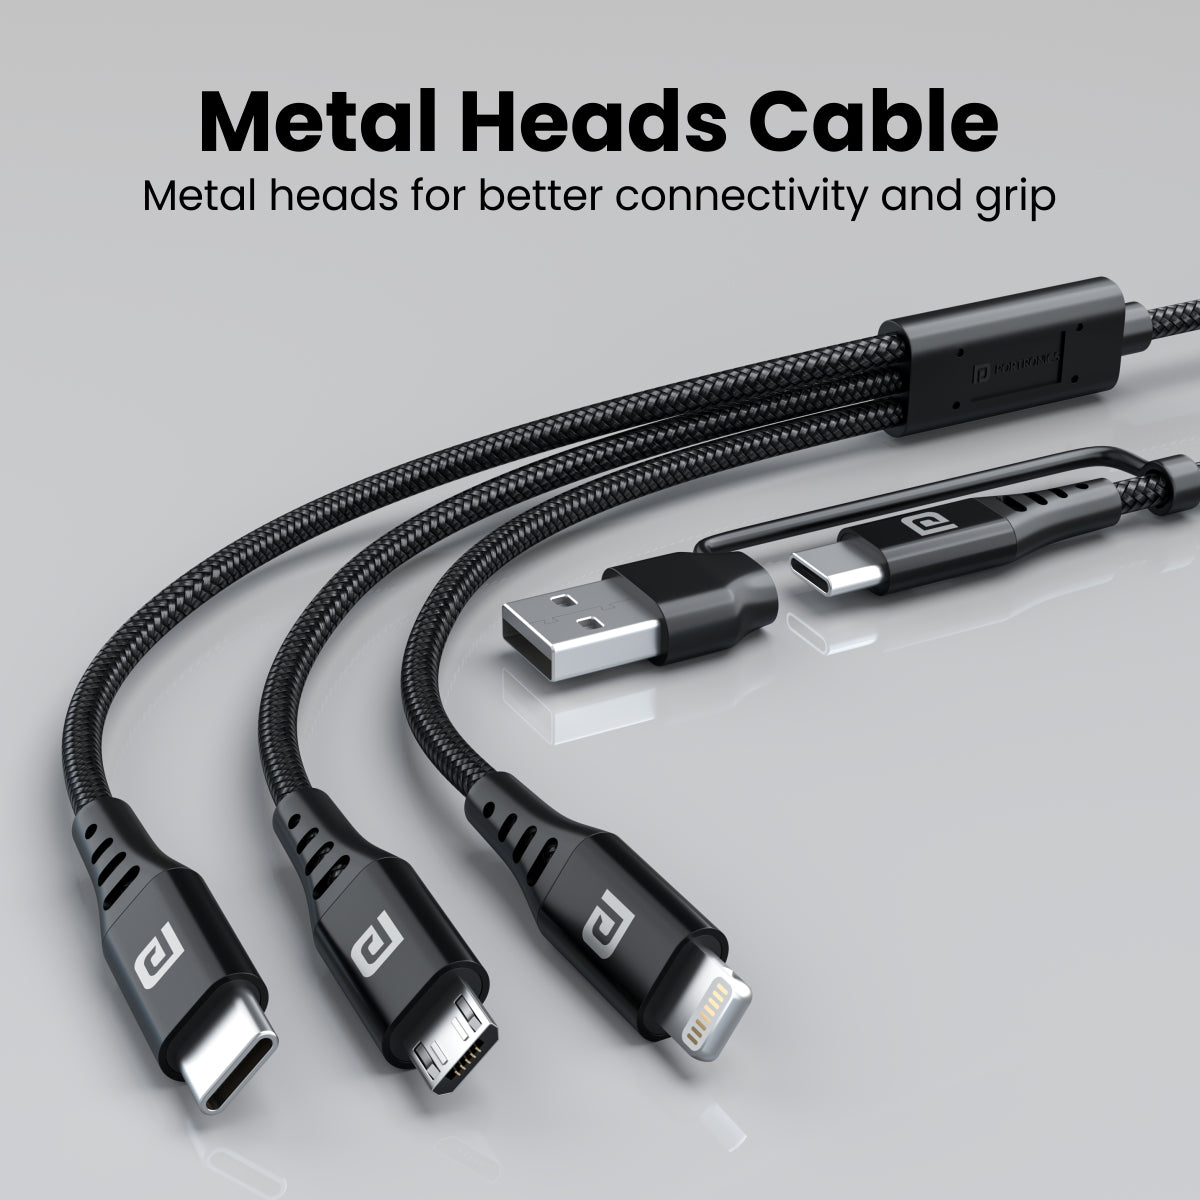 Black Portronics Konnect J9 3-in-1 USB cable has Type-C, Micro USB and 8-pin with metal head 